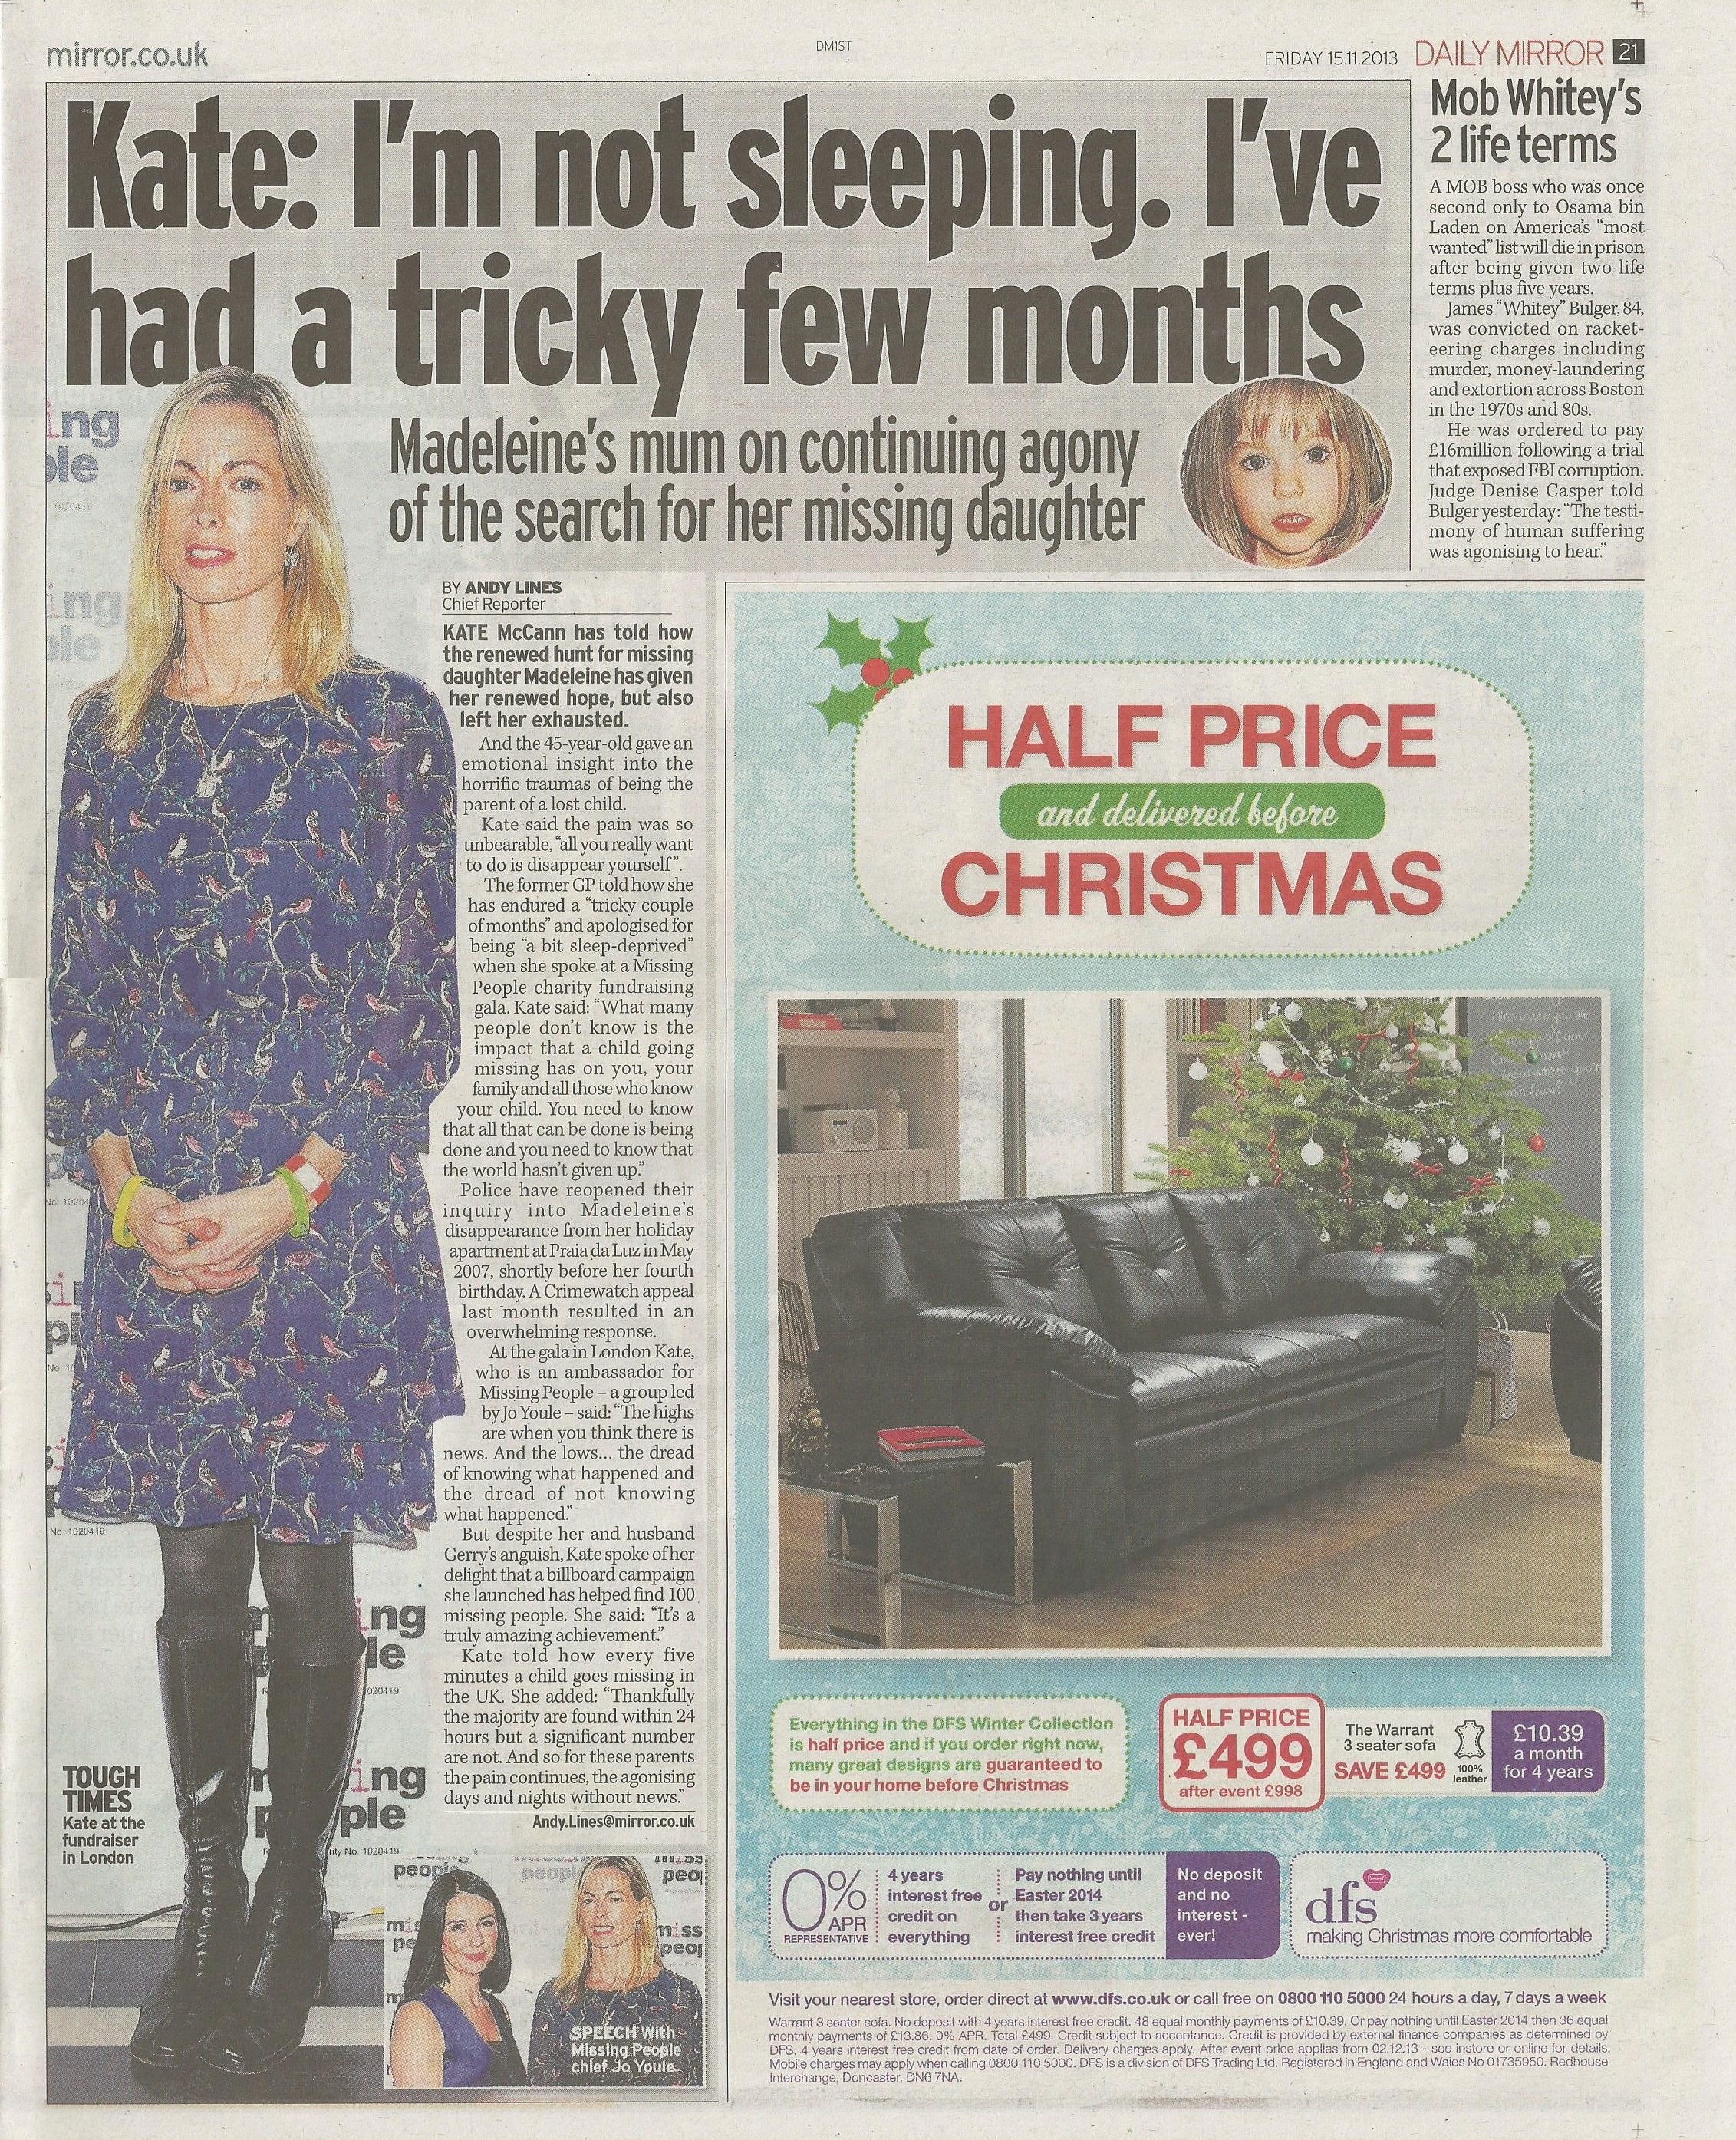 Daily Mirror, paper edition, page 21: ''Kate: I'm not sleeping. I've had a tricky few months', 15 November 2013